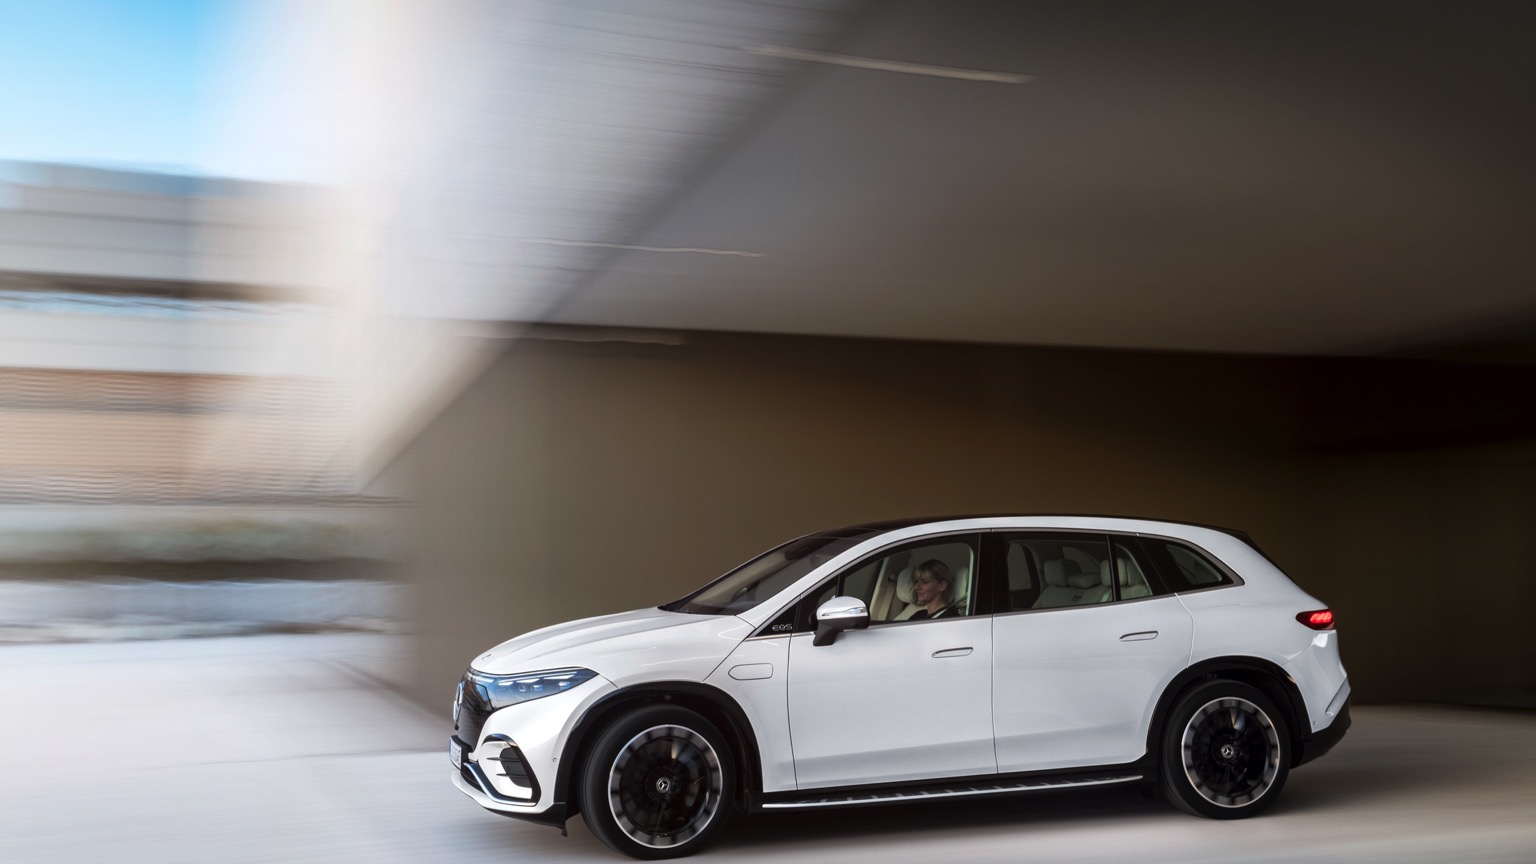 Mercedes EQS SUV 580 4MATIC Pictures